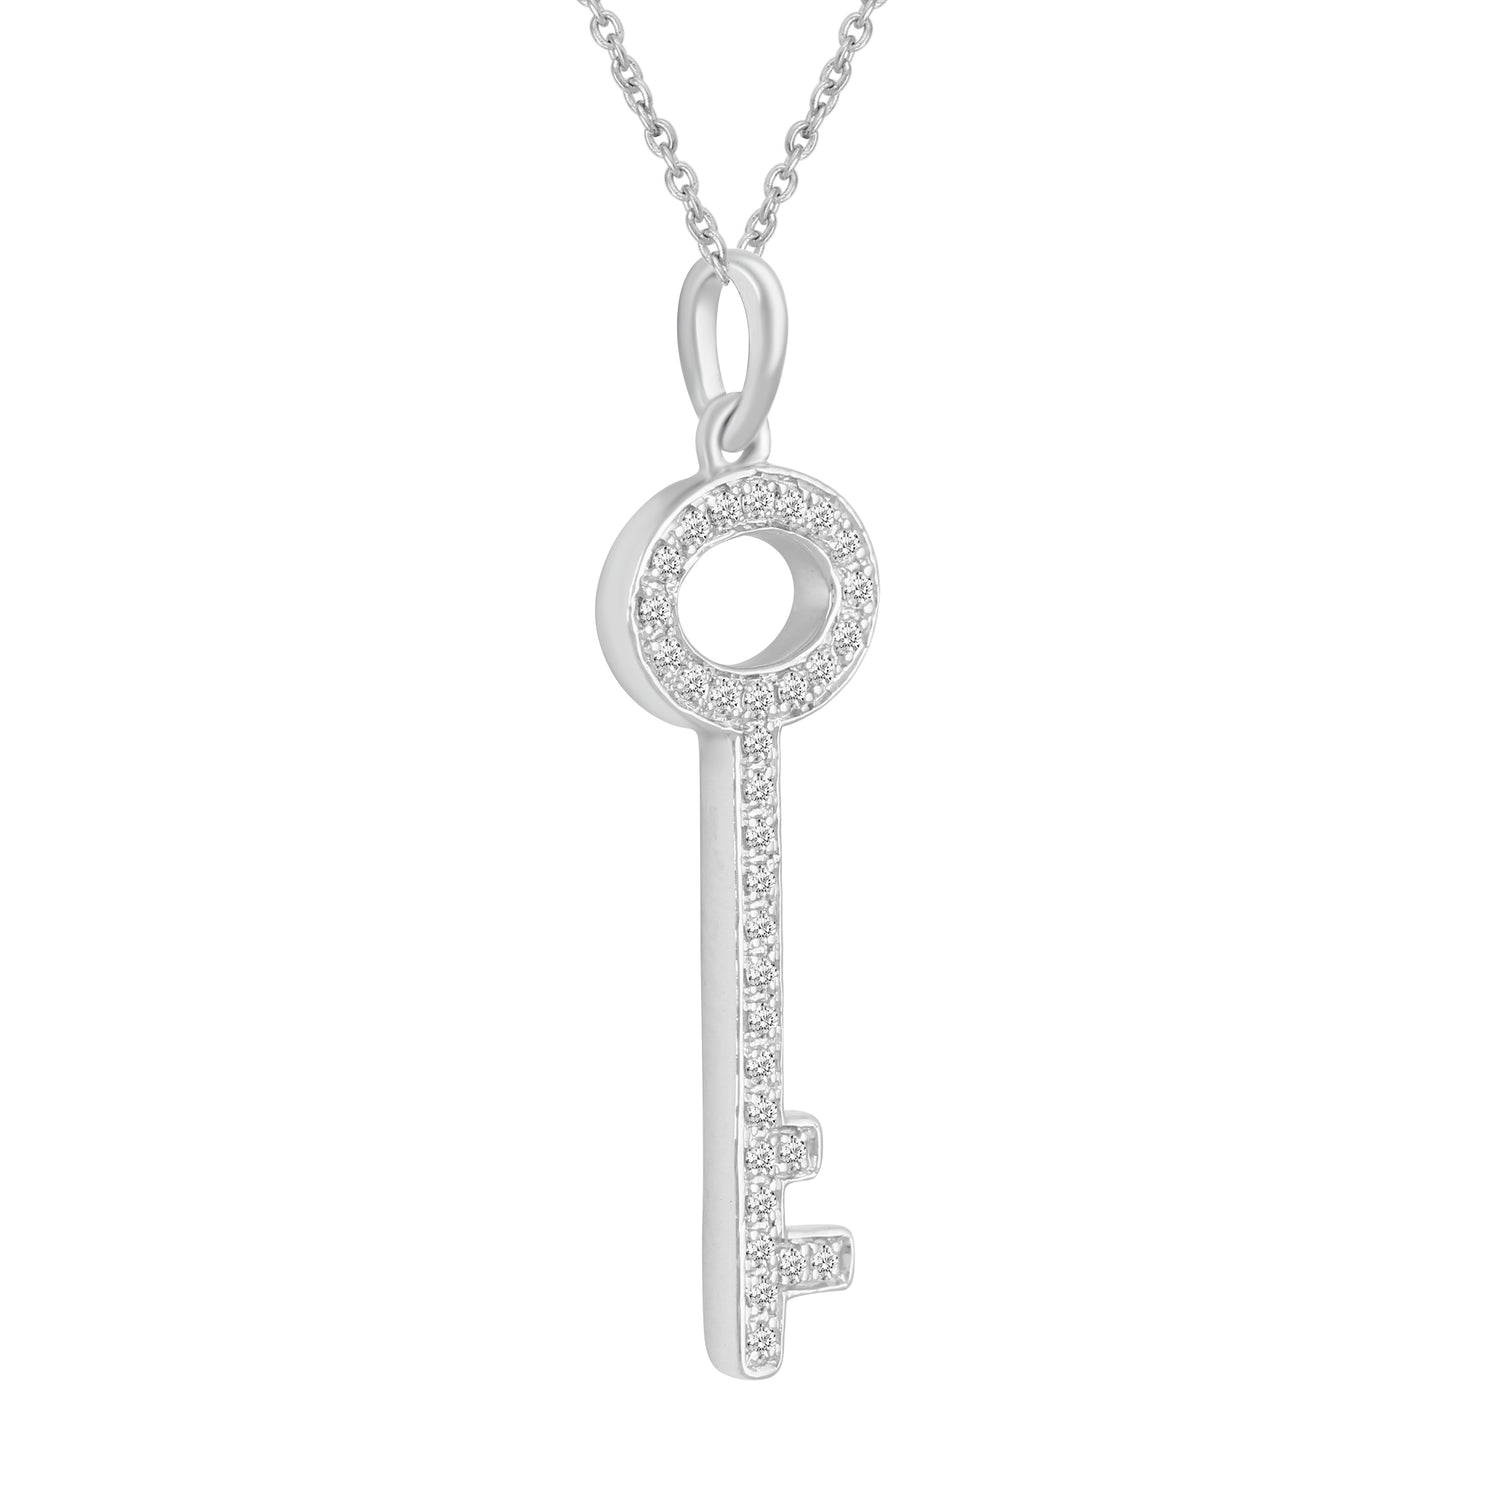 1/6CT TW Diamond Key Pendant in Sterling Silver with 18in Cable Chain